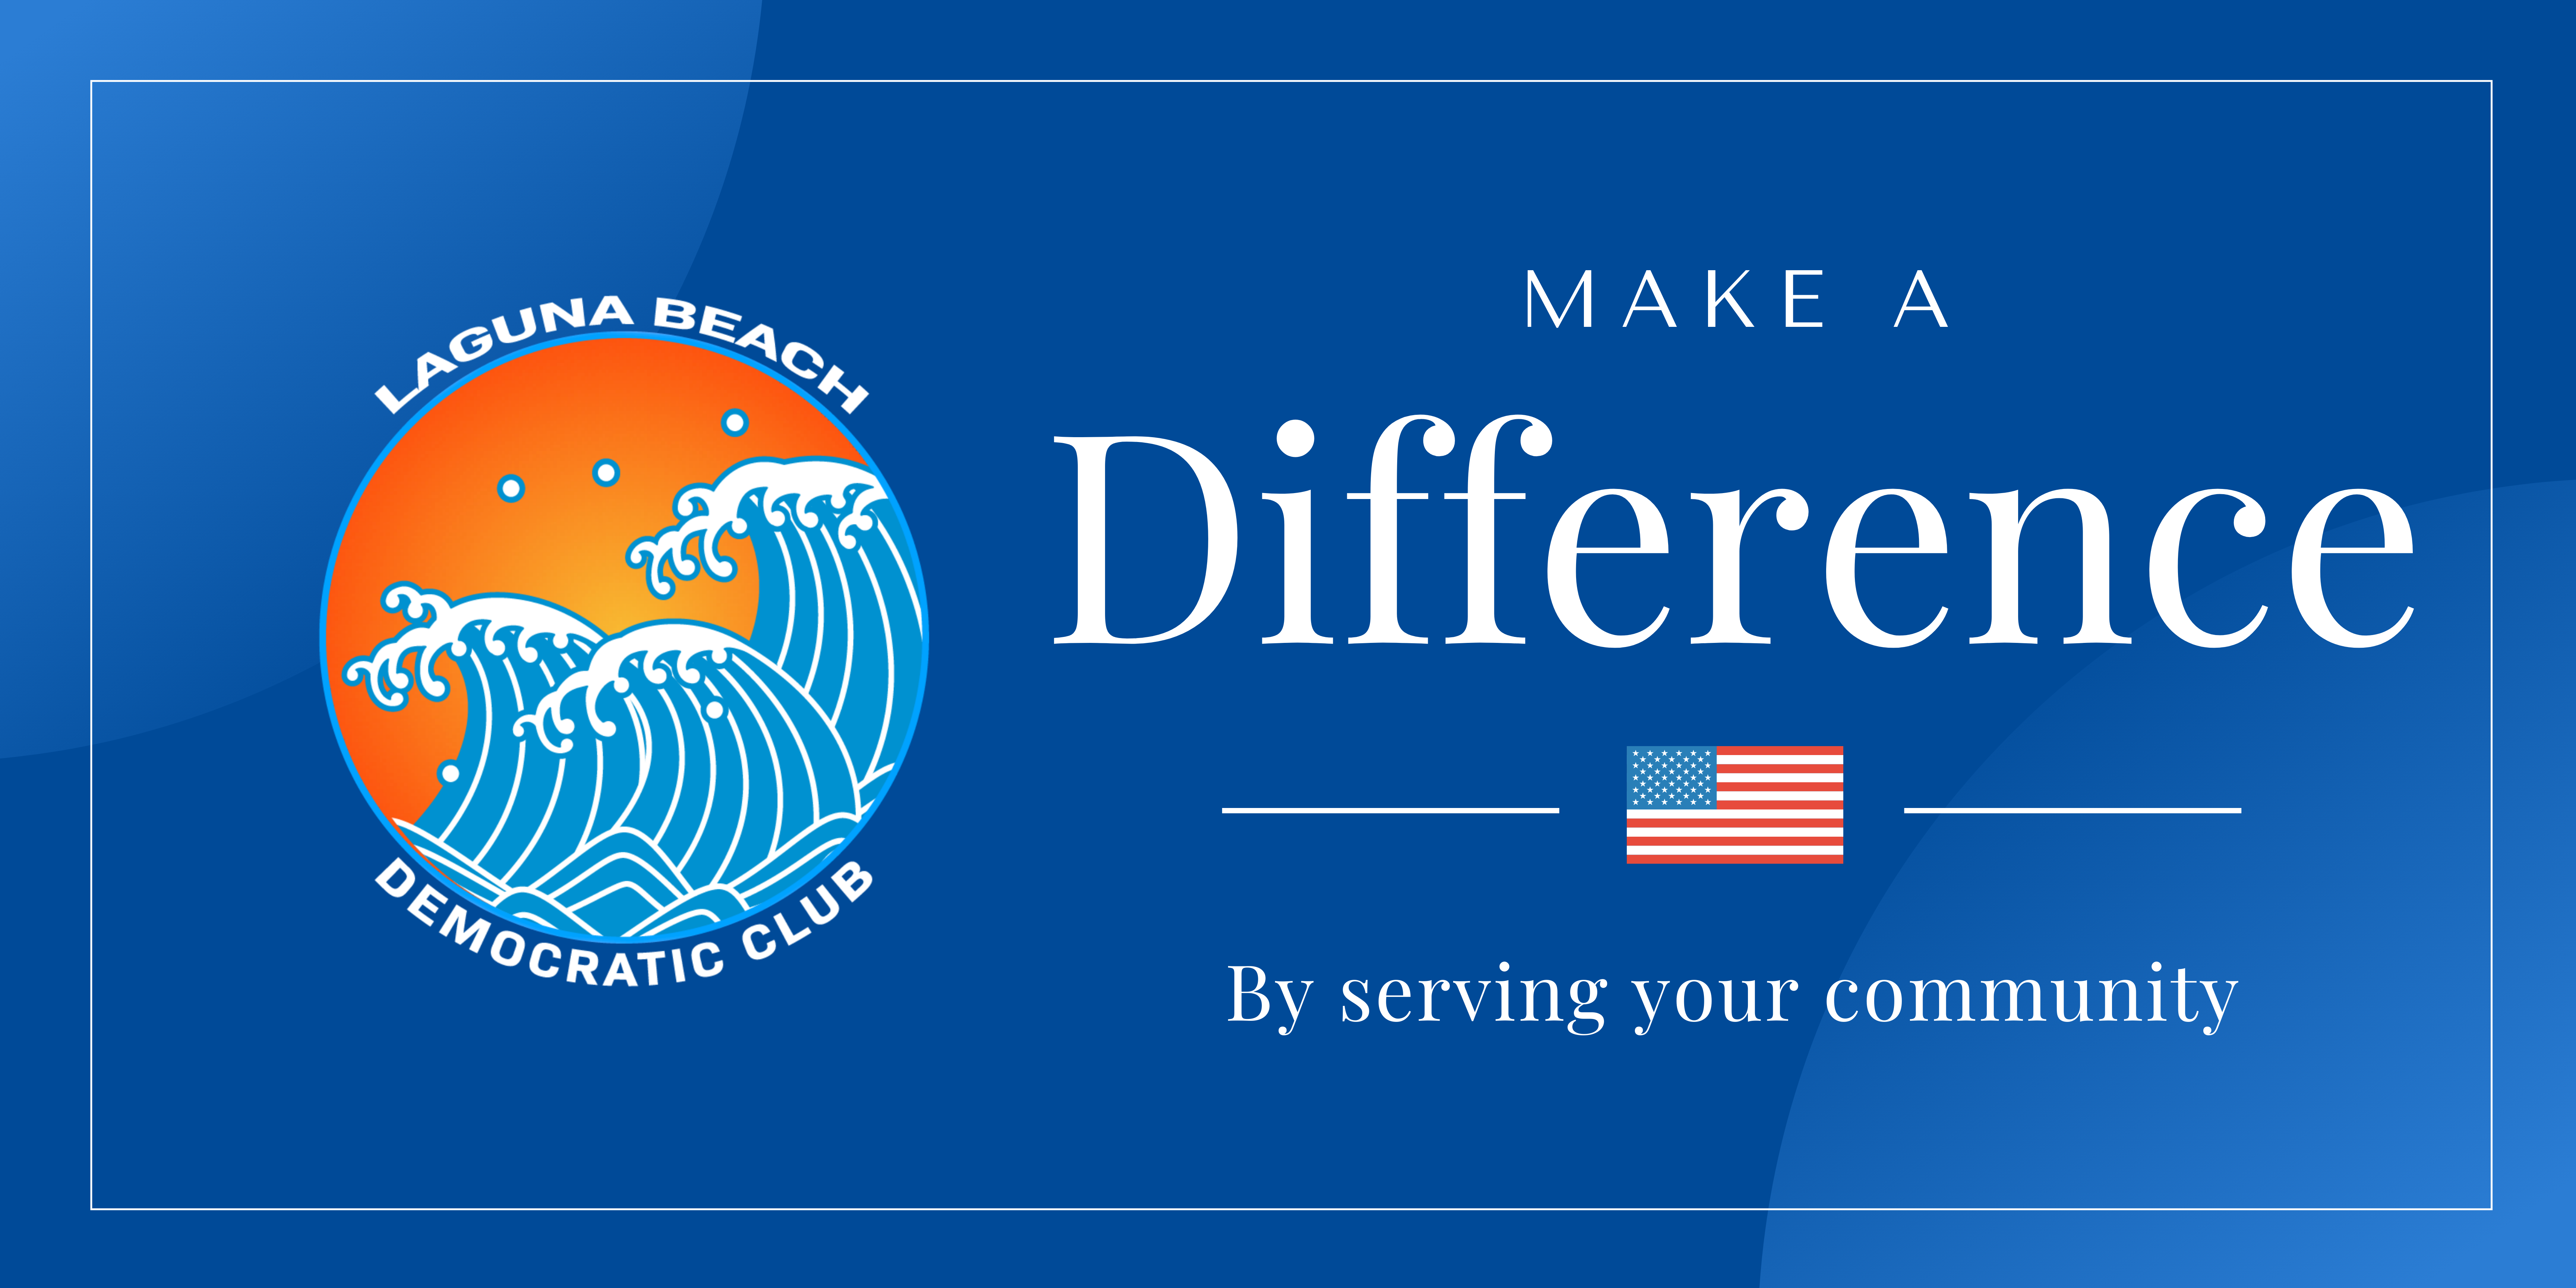 The Laguna Beach Democratic Club's mission is to help elect qualified Democratic Candidates into leadership positions from the city level up to the national offices. In 2024, the City of Laguna Beach has two City Council seats and two school board seats to be filled. We are seeking input from community members to discuss qualified potential candidates to fill these seats. 
 Click on the image above to submit a Local Office Candidate Recommendation (yourself or someone else) who holds Democratic values and who you believe has the qualifications needed to be a City Council Member or School Board Member.